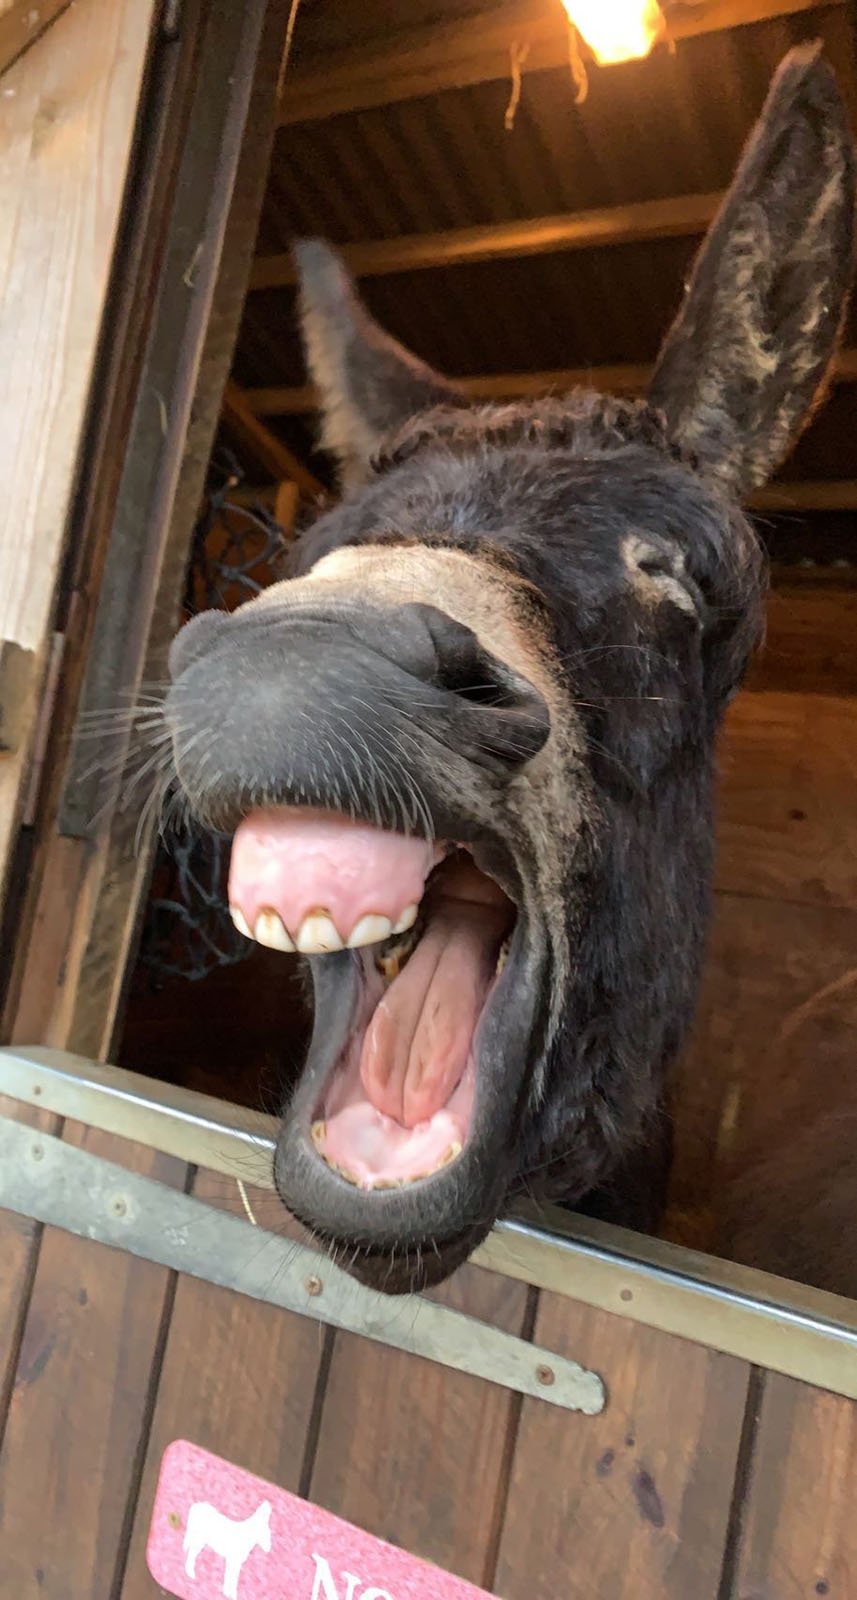 A close-up of a donkey with its mouth wide open, showing its teeth and tongue. The donkey is inside a wooden stable, and part of a light fixture is visible at the top of the image. The scene suggests the donkey may be braying or yawning.